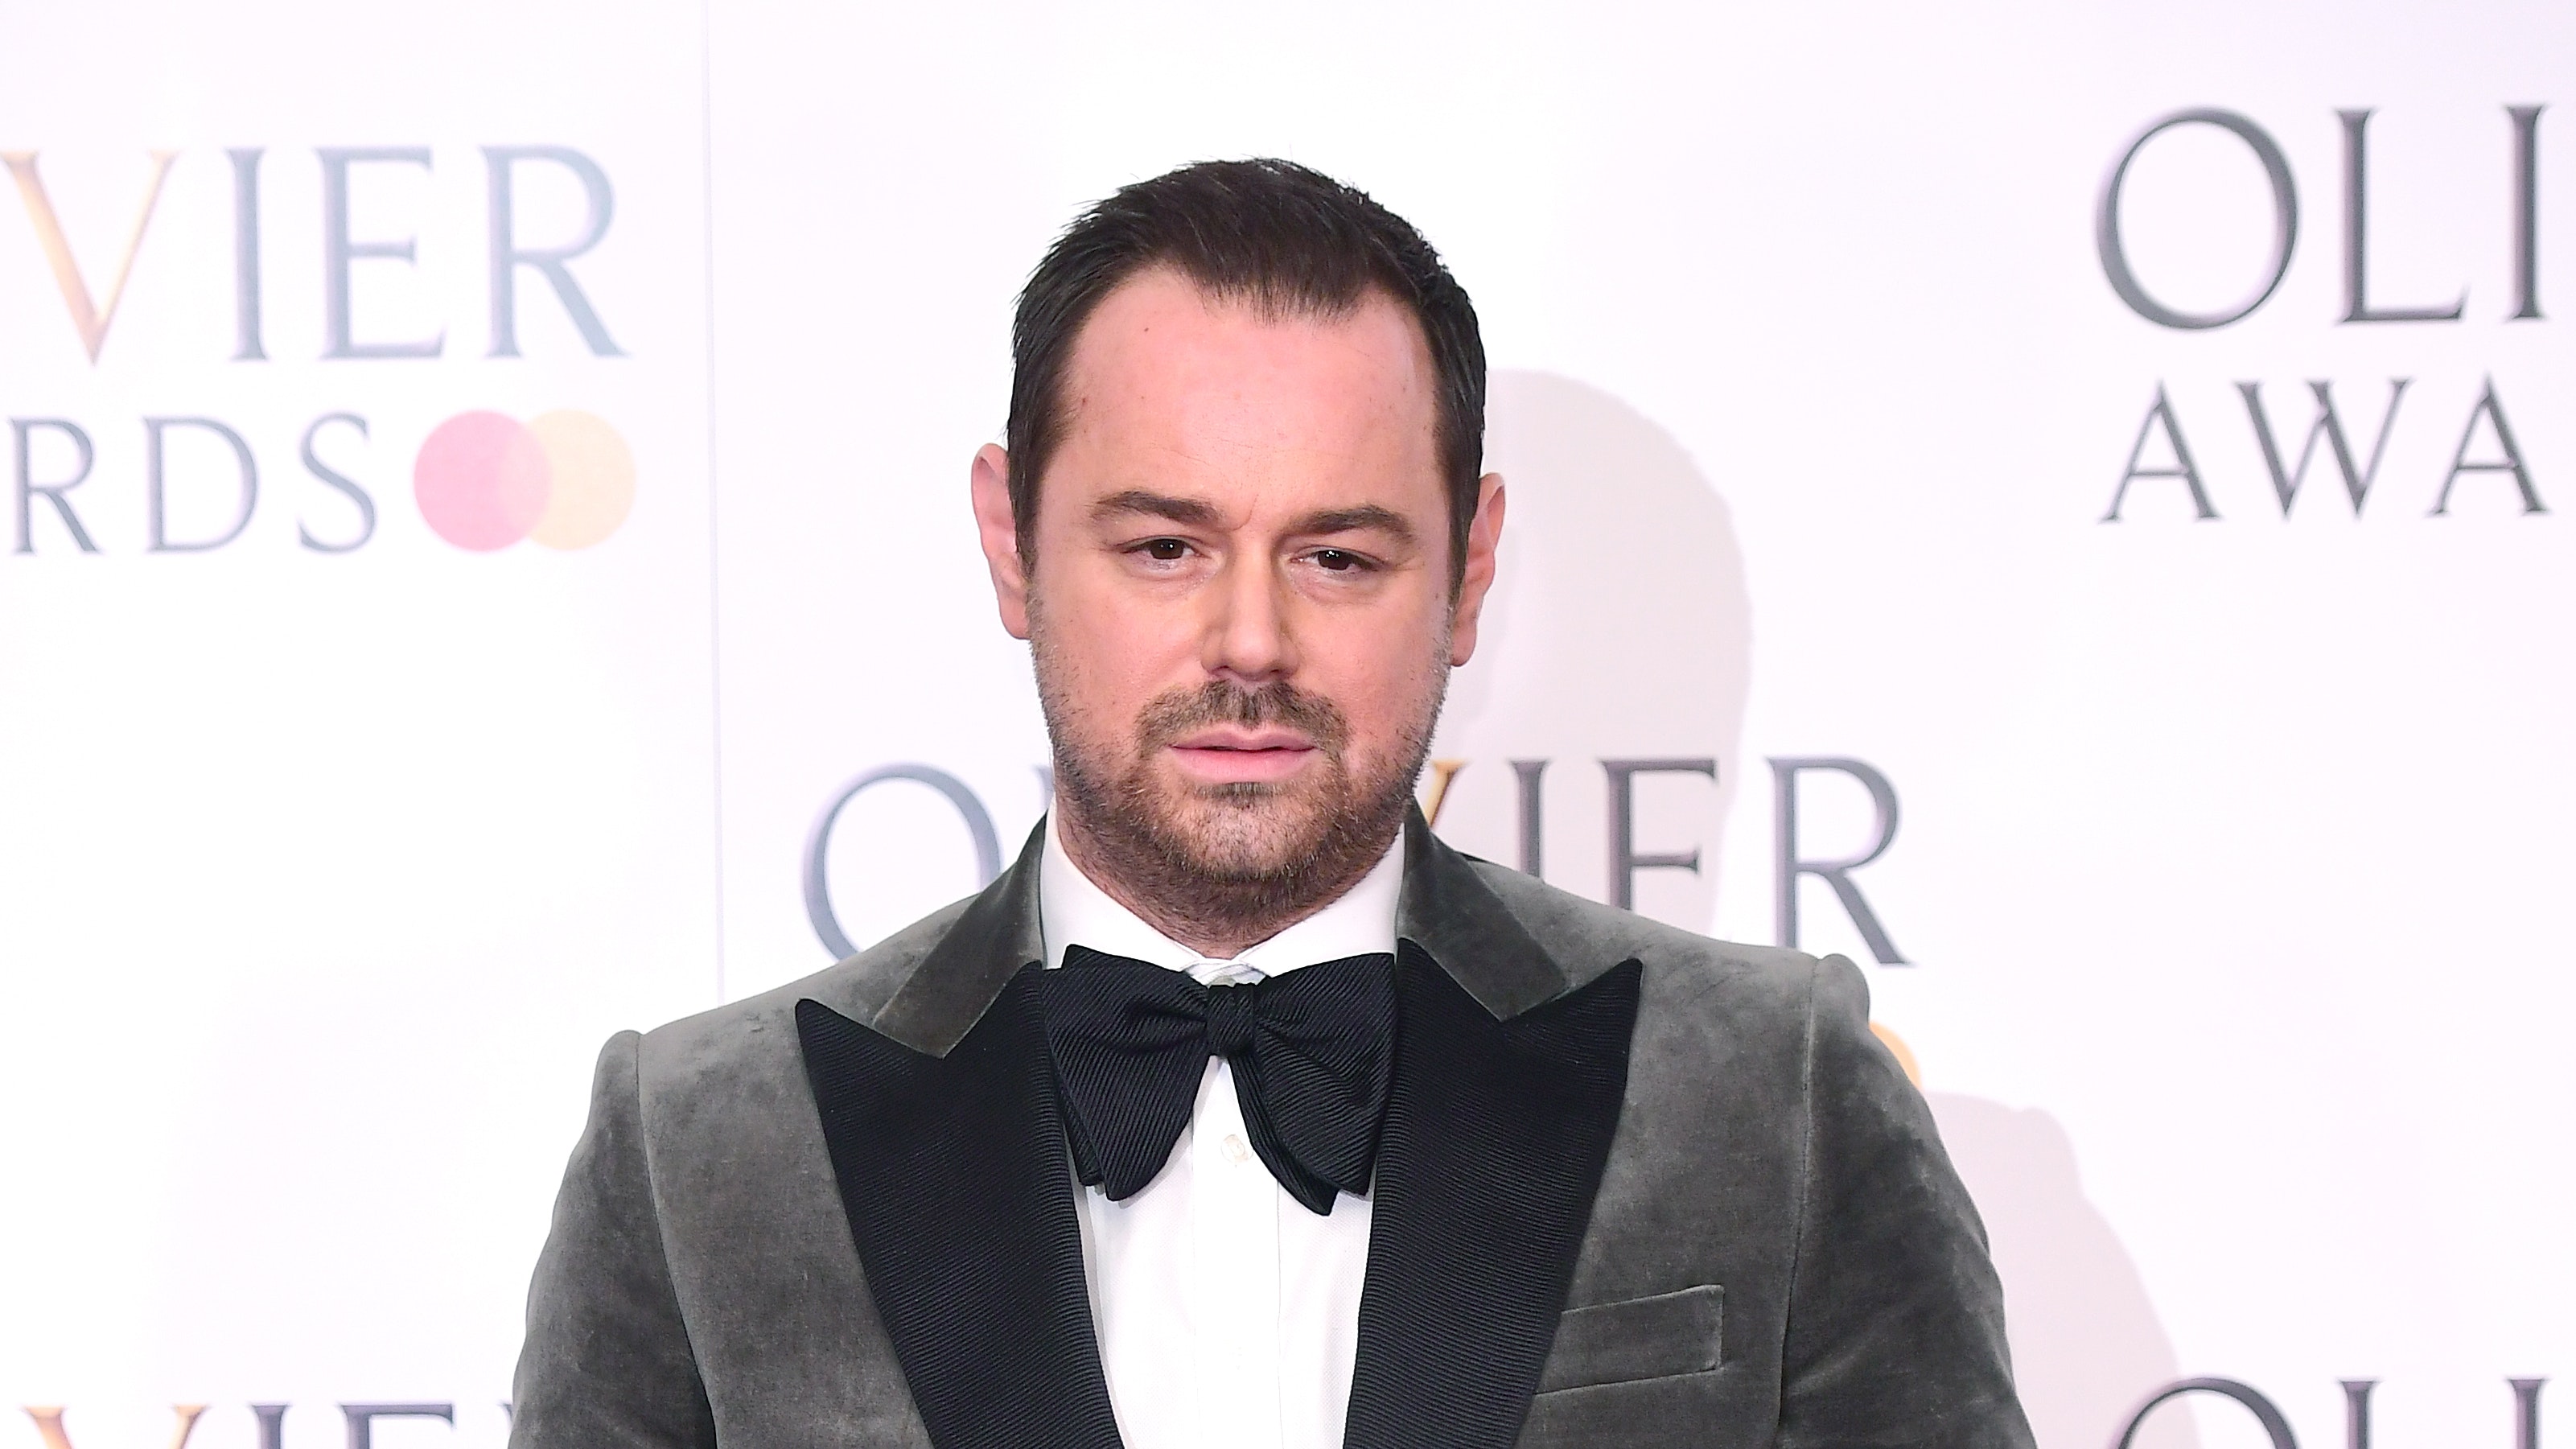 Danny Dyer Net worth on the red carpet